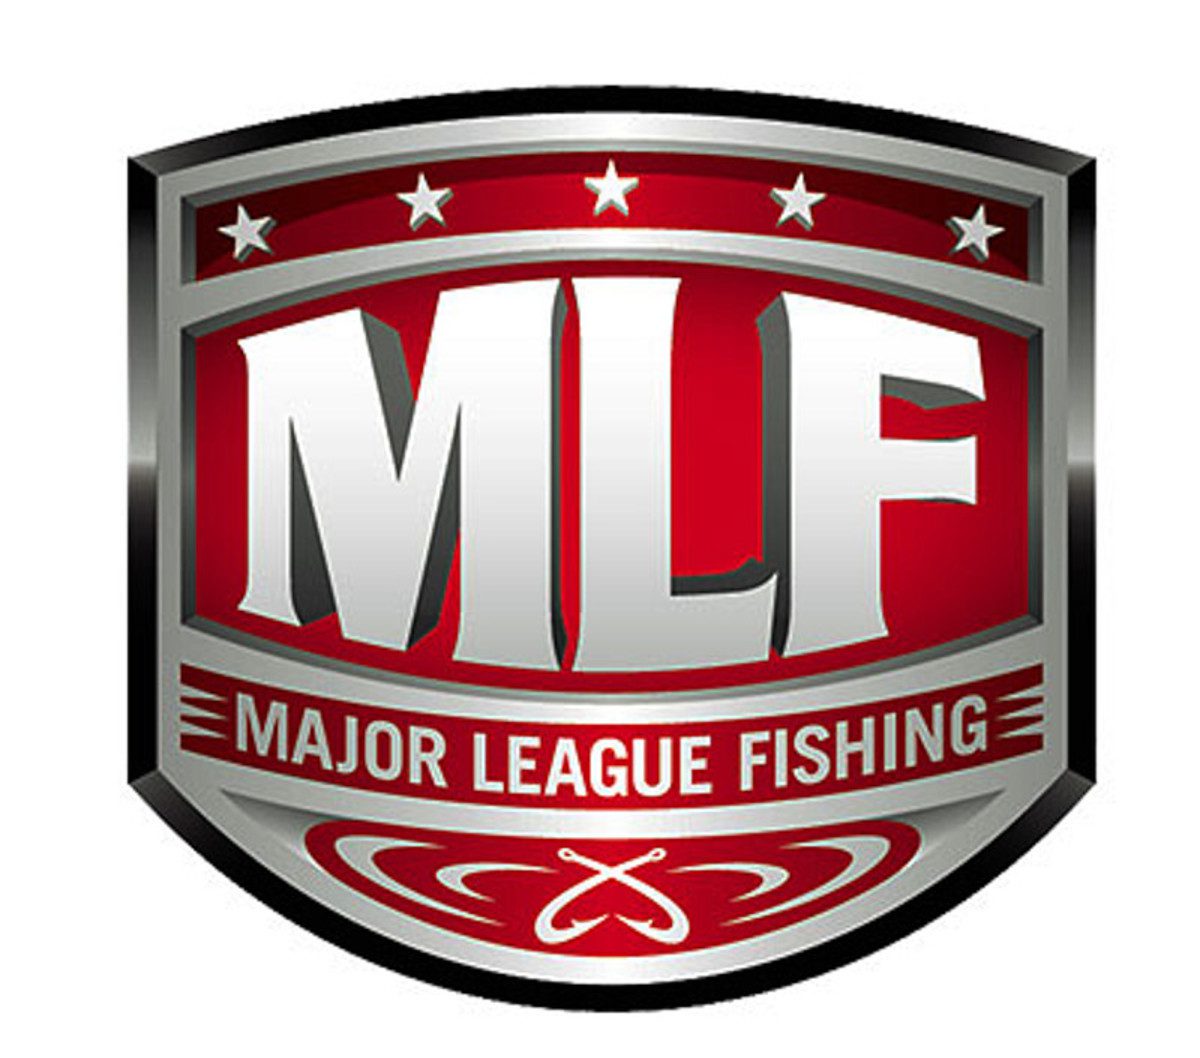 Top 30 Pro Anglers Compete in La Crosse, Wisconsin,  August 21-25 for Tour Championship